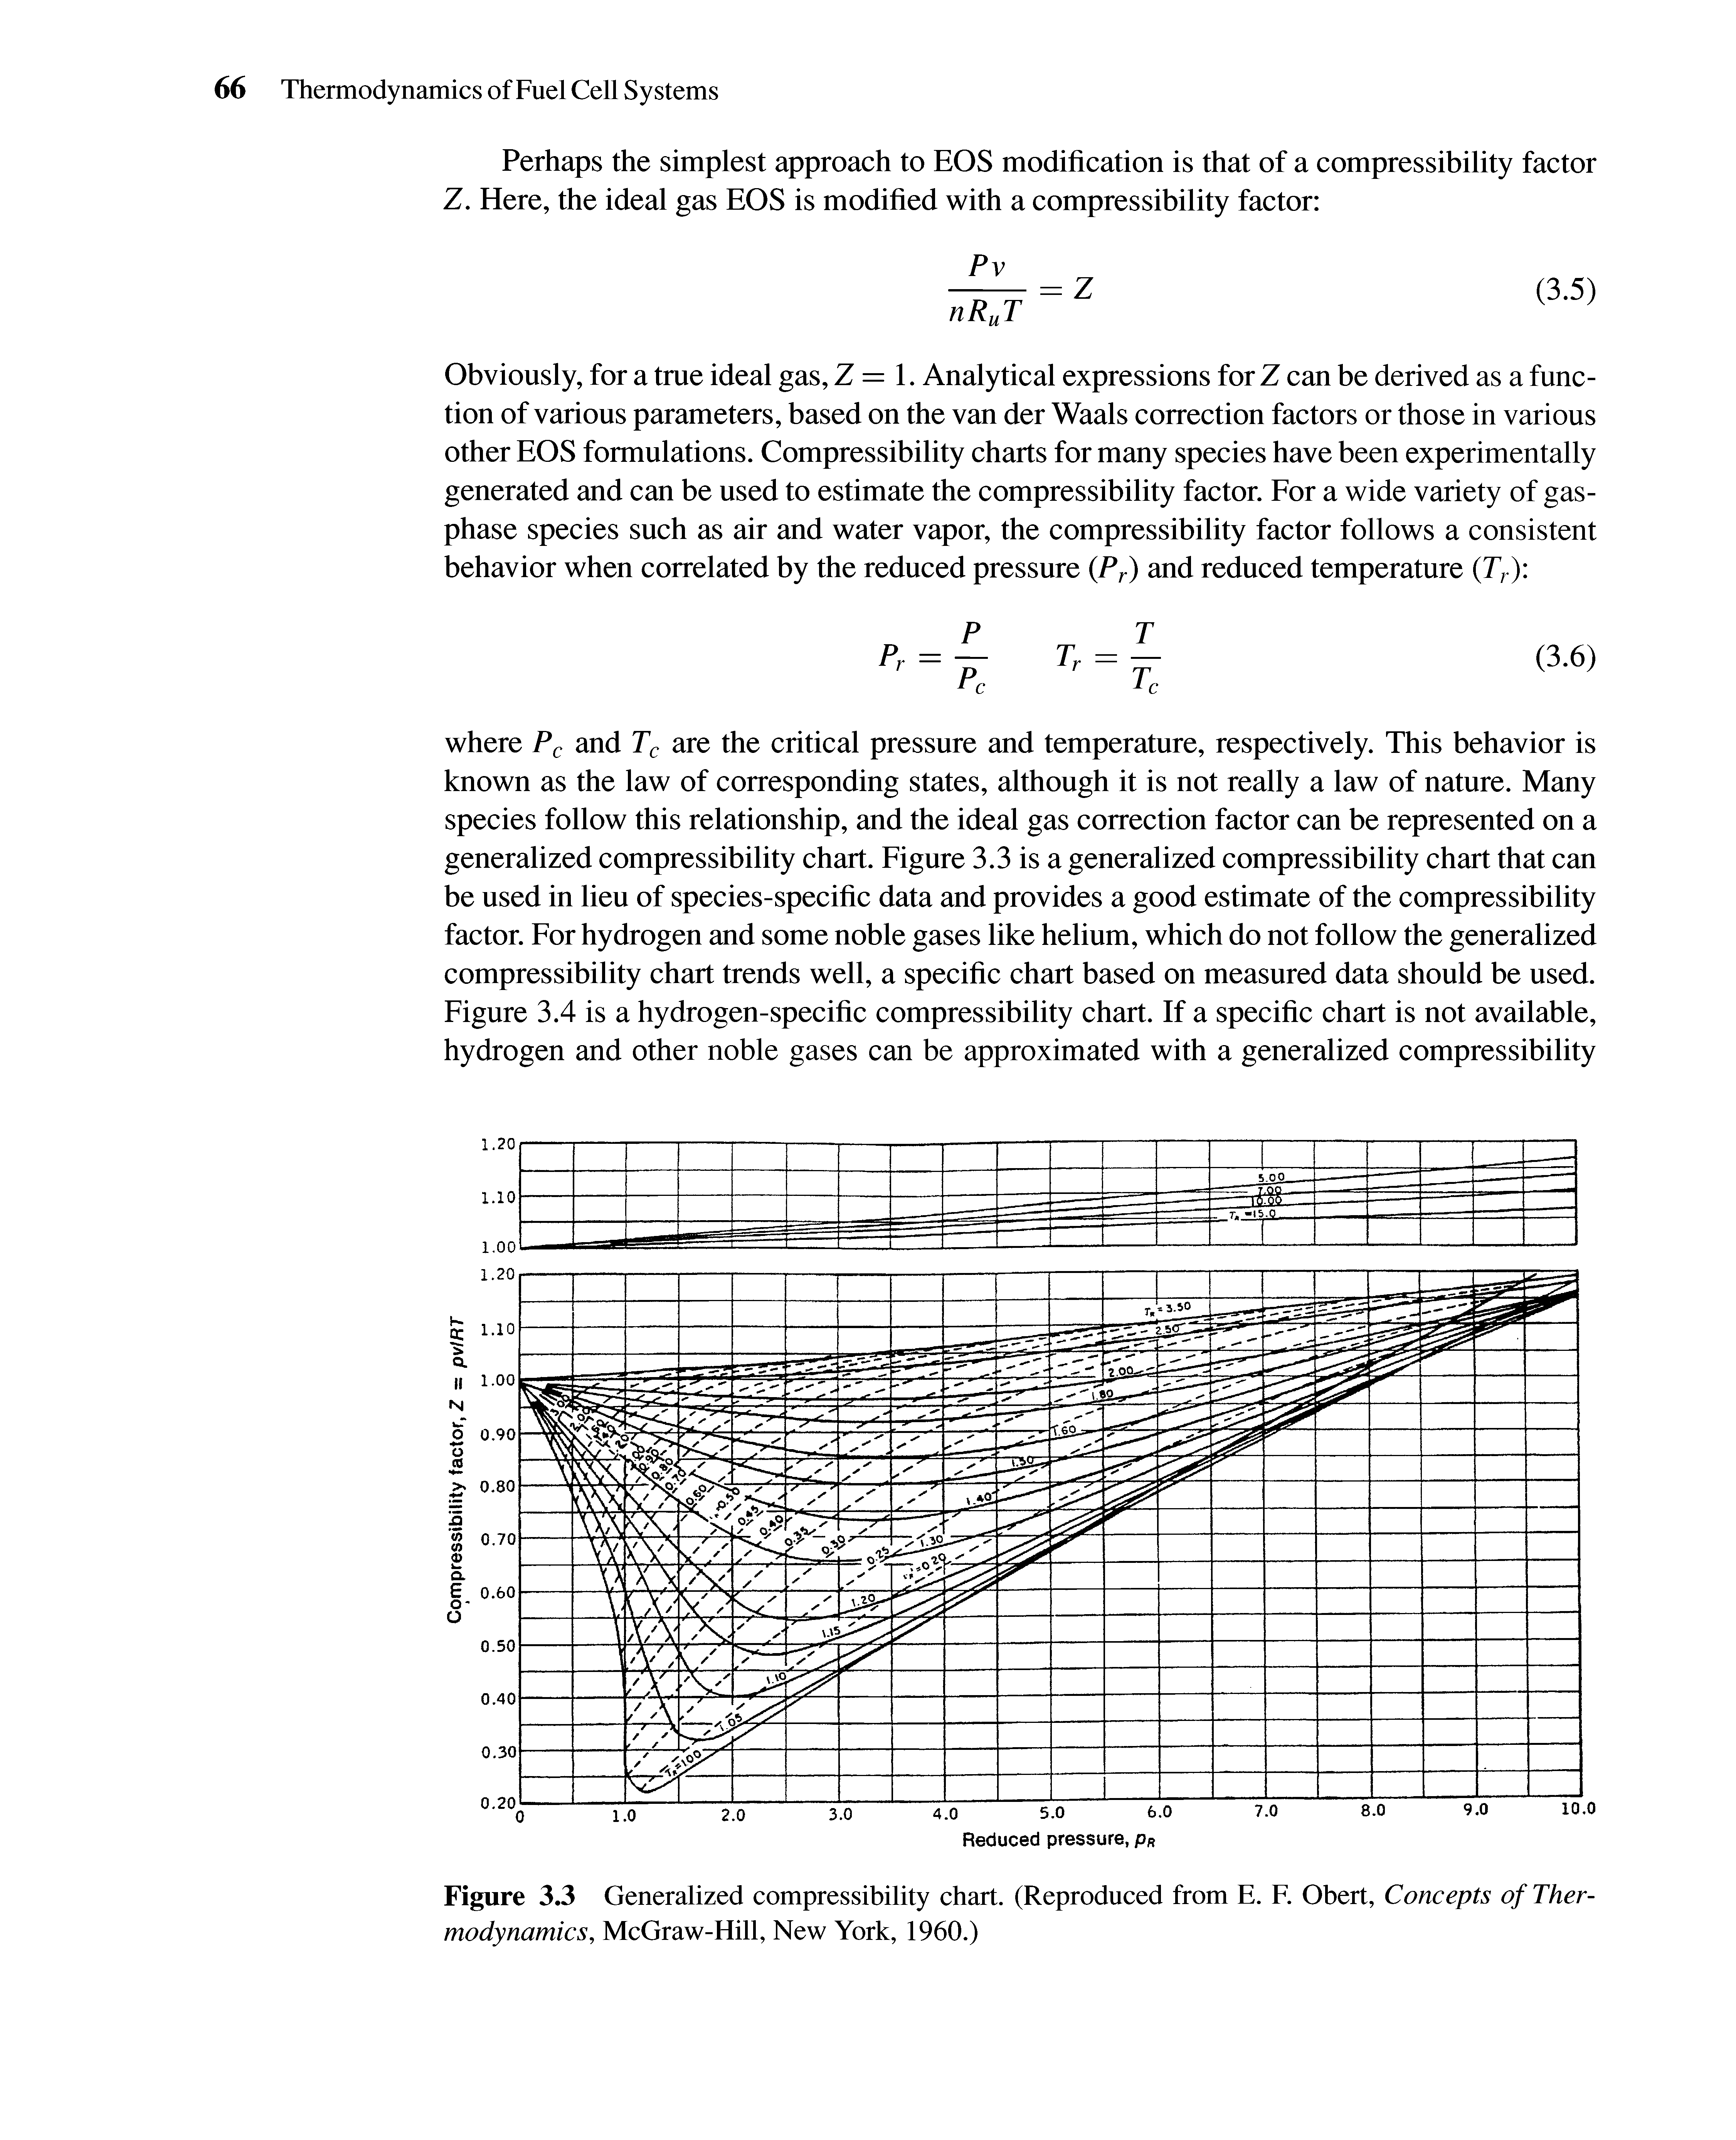 Figure 3.3 Generalized compressibility chart. (Reproduced from E. F. Obert, Concepts of Thermodynamics, McGraw-Hill, New York, 1960.)...